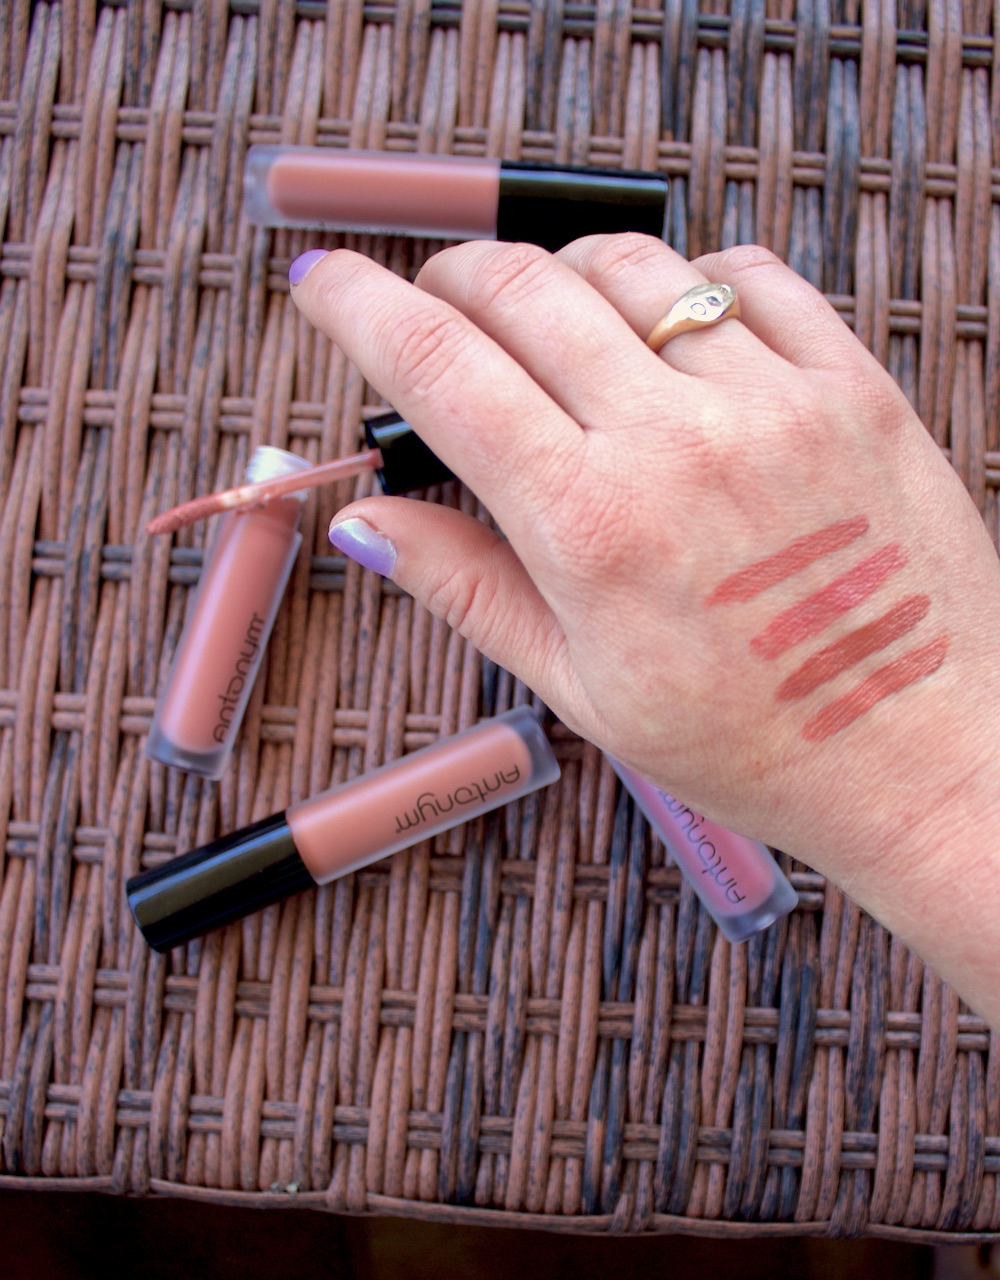 A hand with five swatches of different shades of lipstick on the back, next to five lipstick tubes placed on a wicker surface.